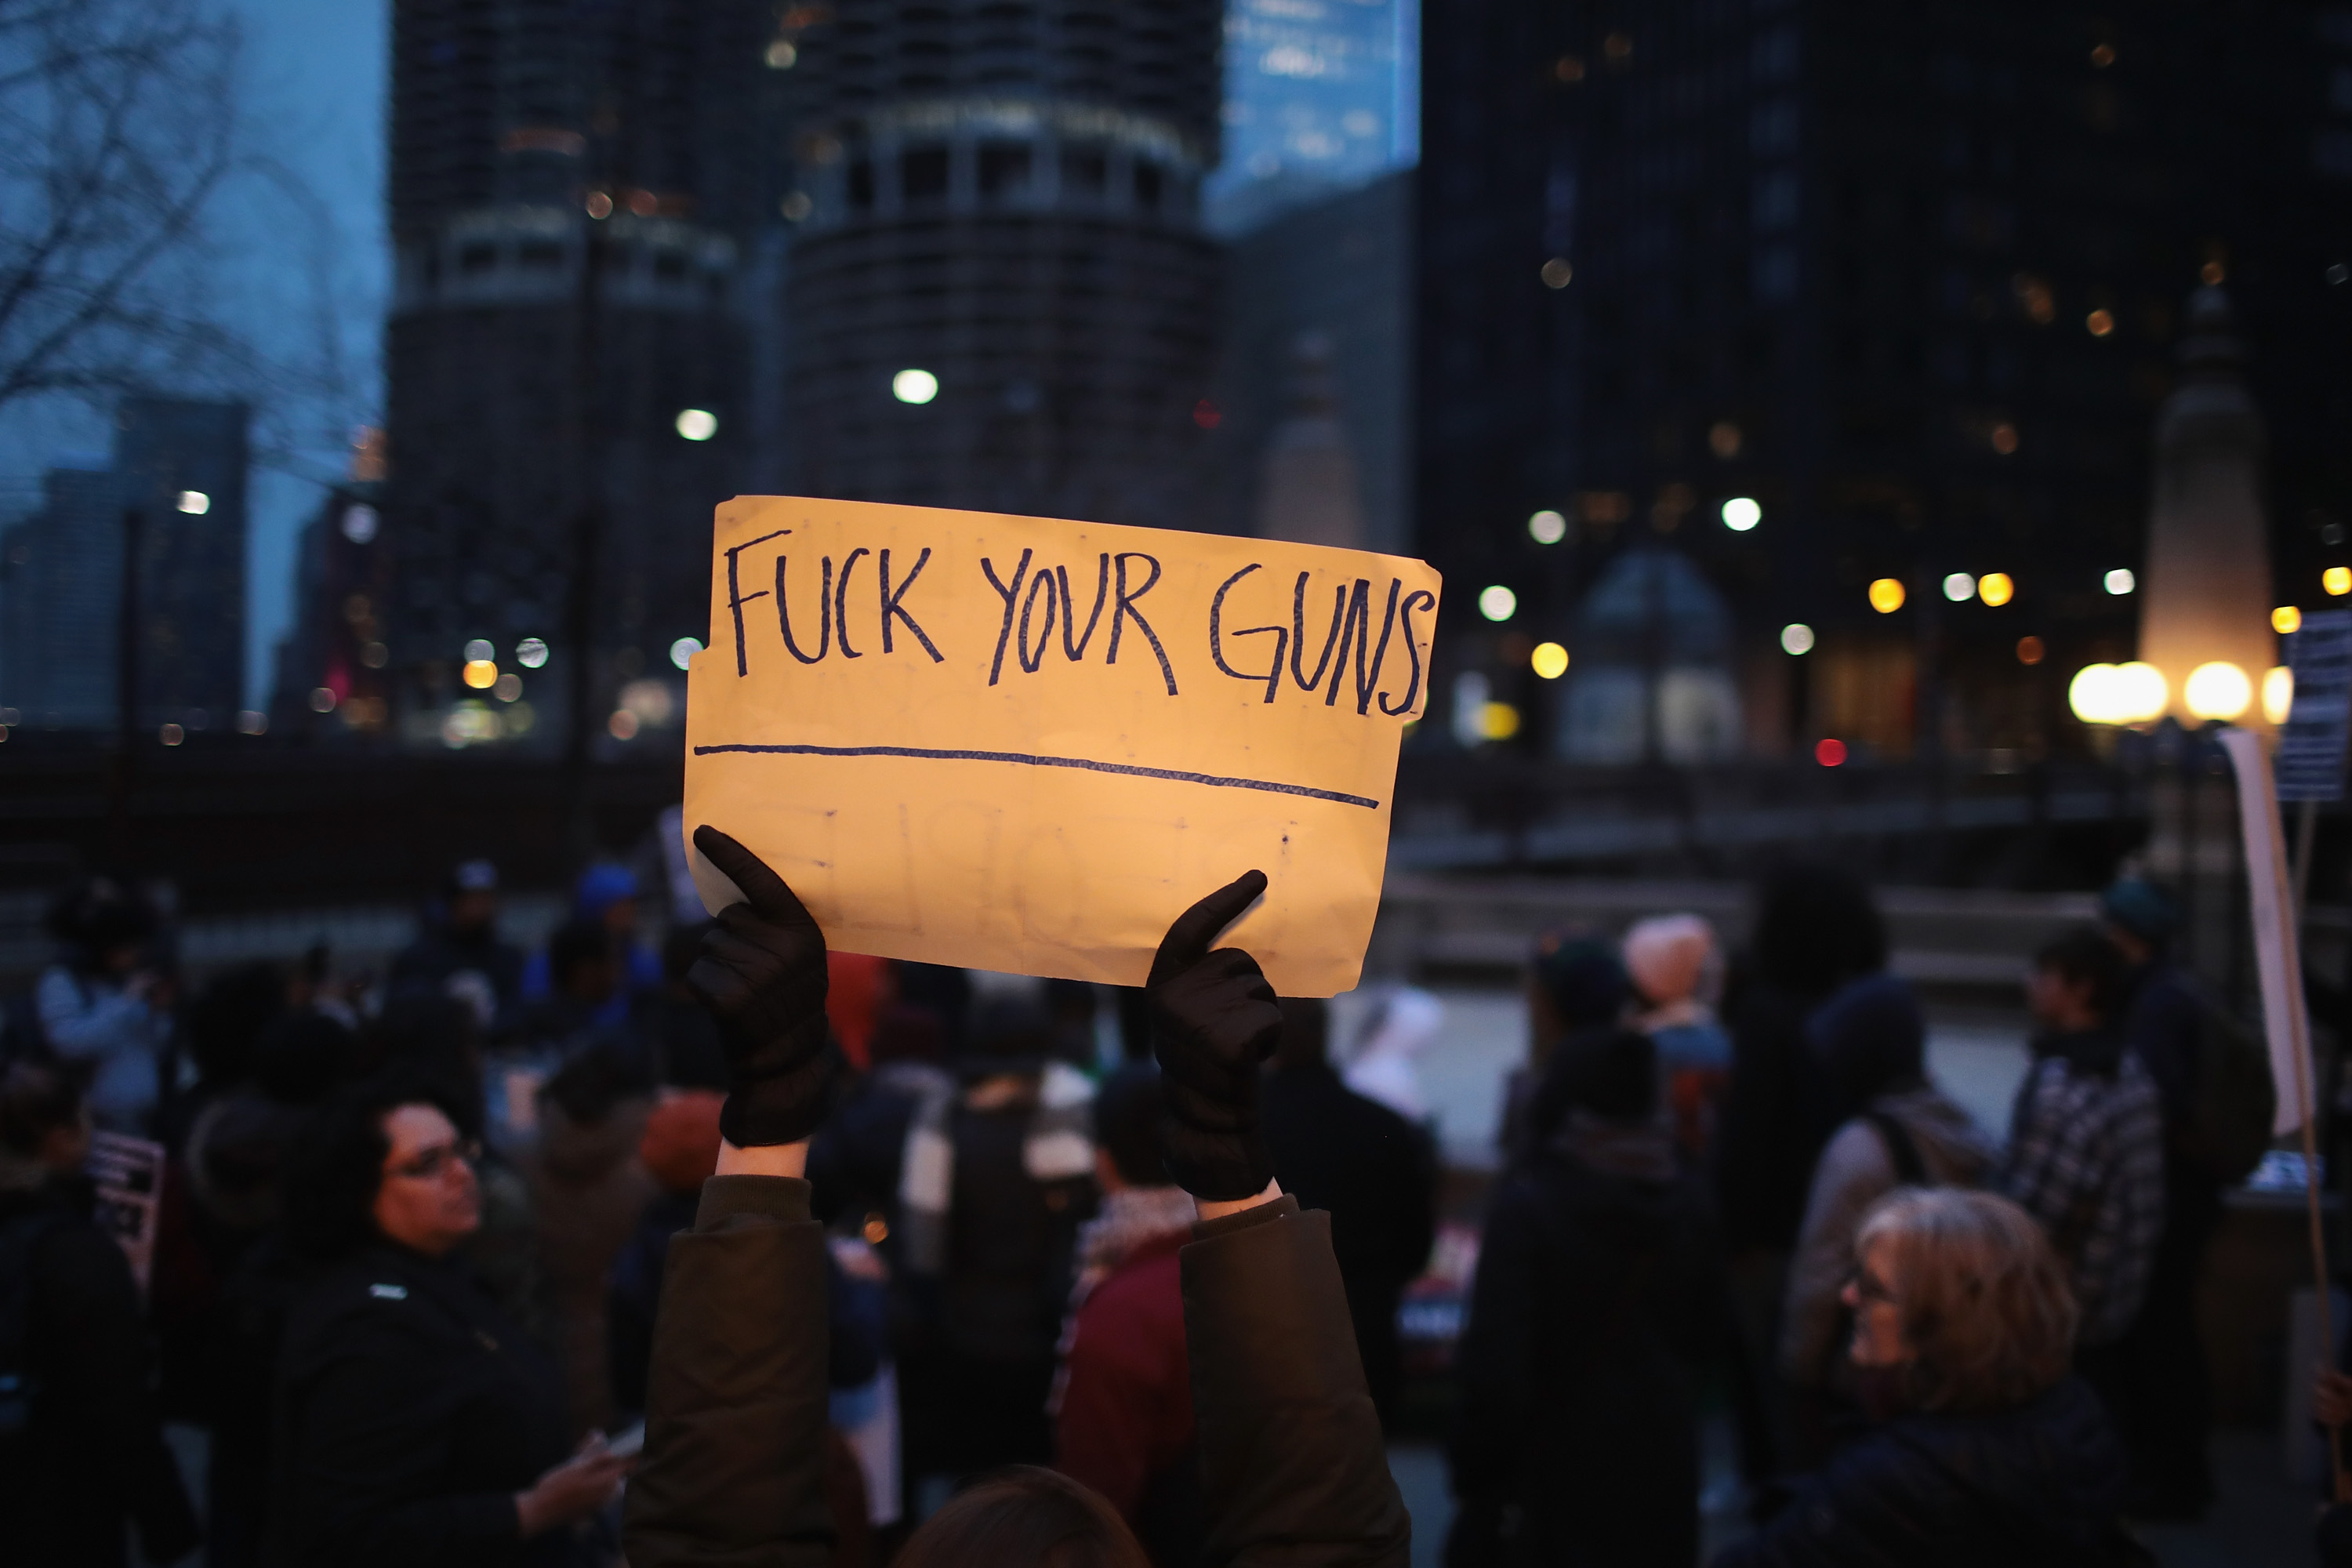 CHICAGO, IL - APRIL 02: In recognition of the 50th anniversary of the death of Dr. Martin Luther King Jr., and in solidarity with the family and supporters of Stephon Clark and others killed by police, demonstrators protest and march in the Magnificent Mile shopping district on April 2, 2018 in Chicago, Illinois. Dr. King was killed on April 4, 1968. (Photo by Scott Olson/Getty Images)